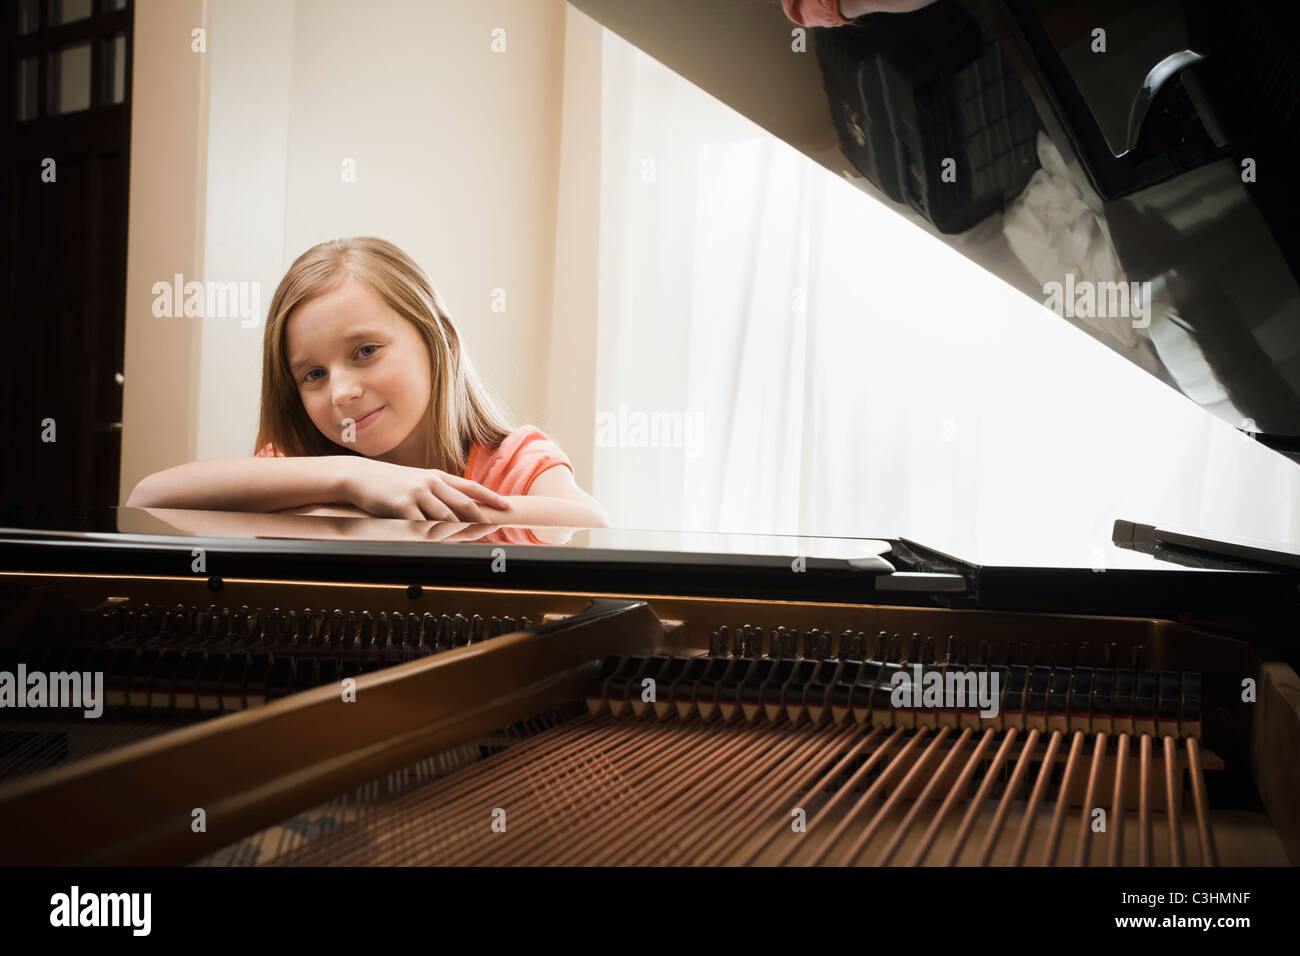 Girl (8-9) leaning on grand piano Stock Photo